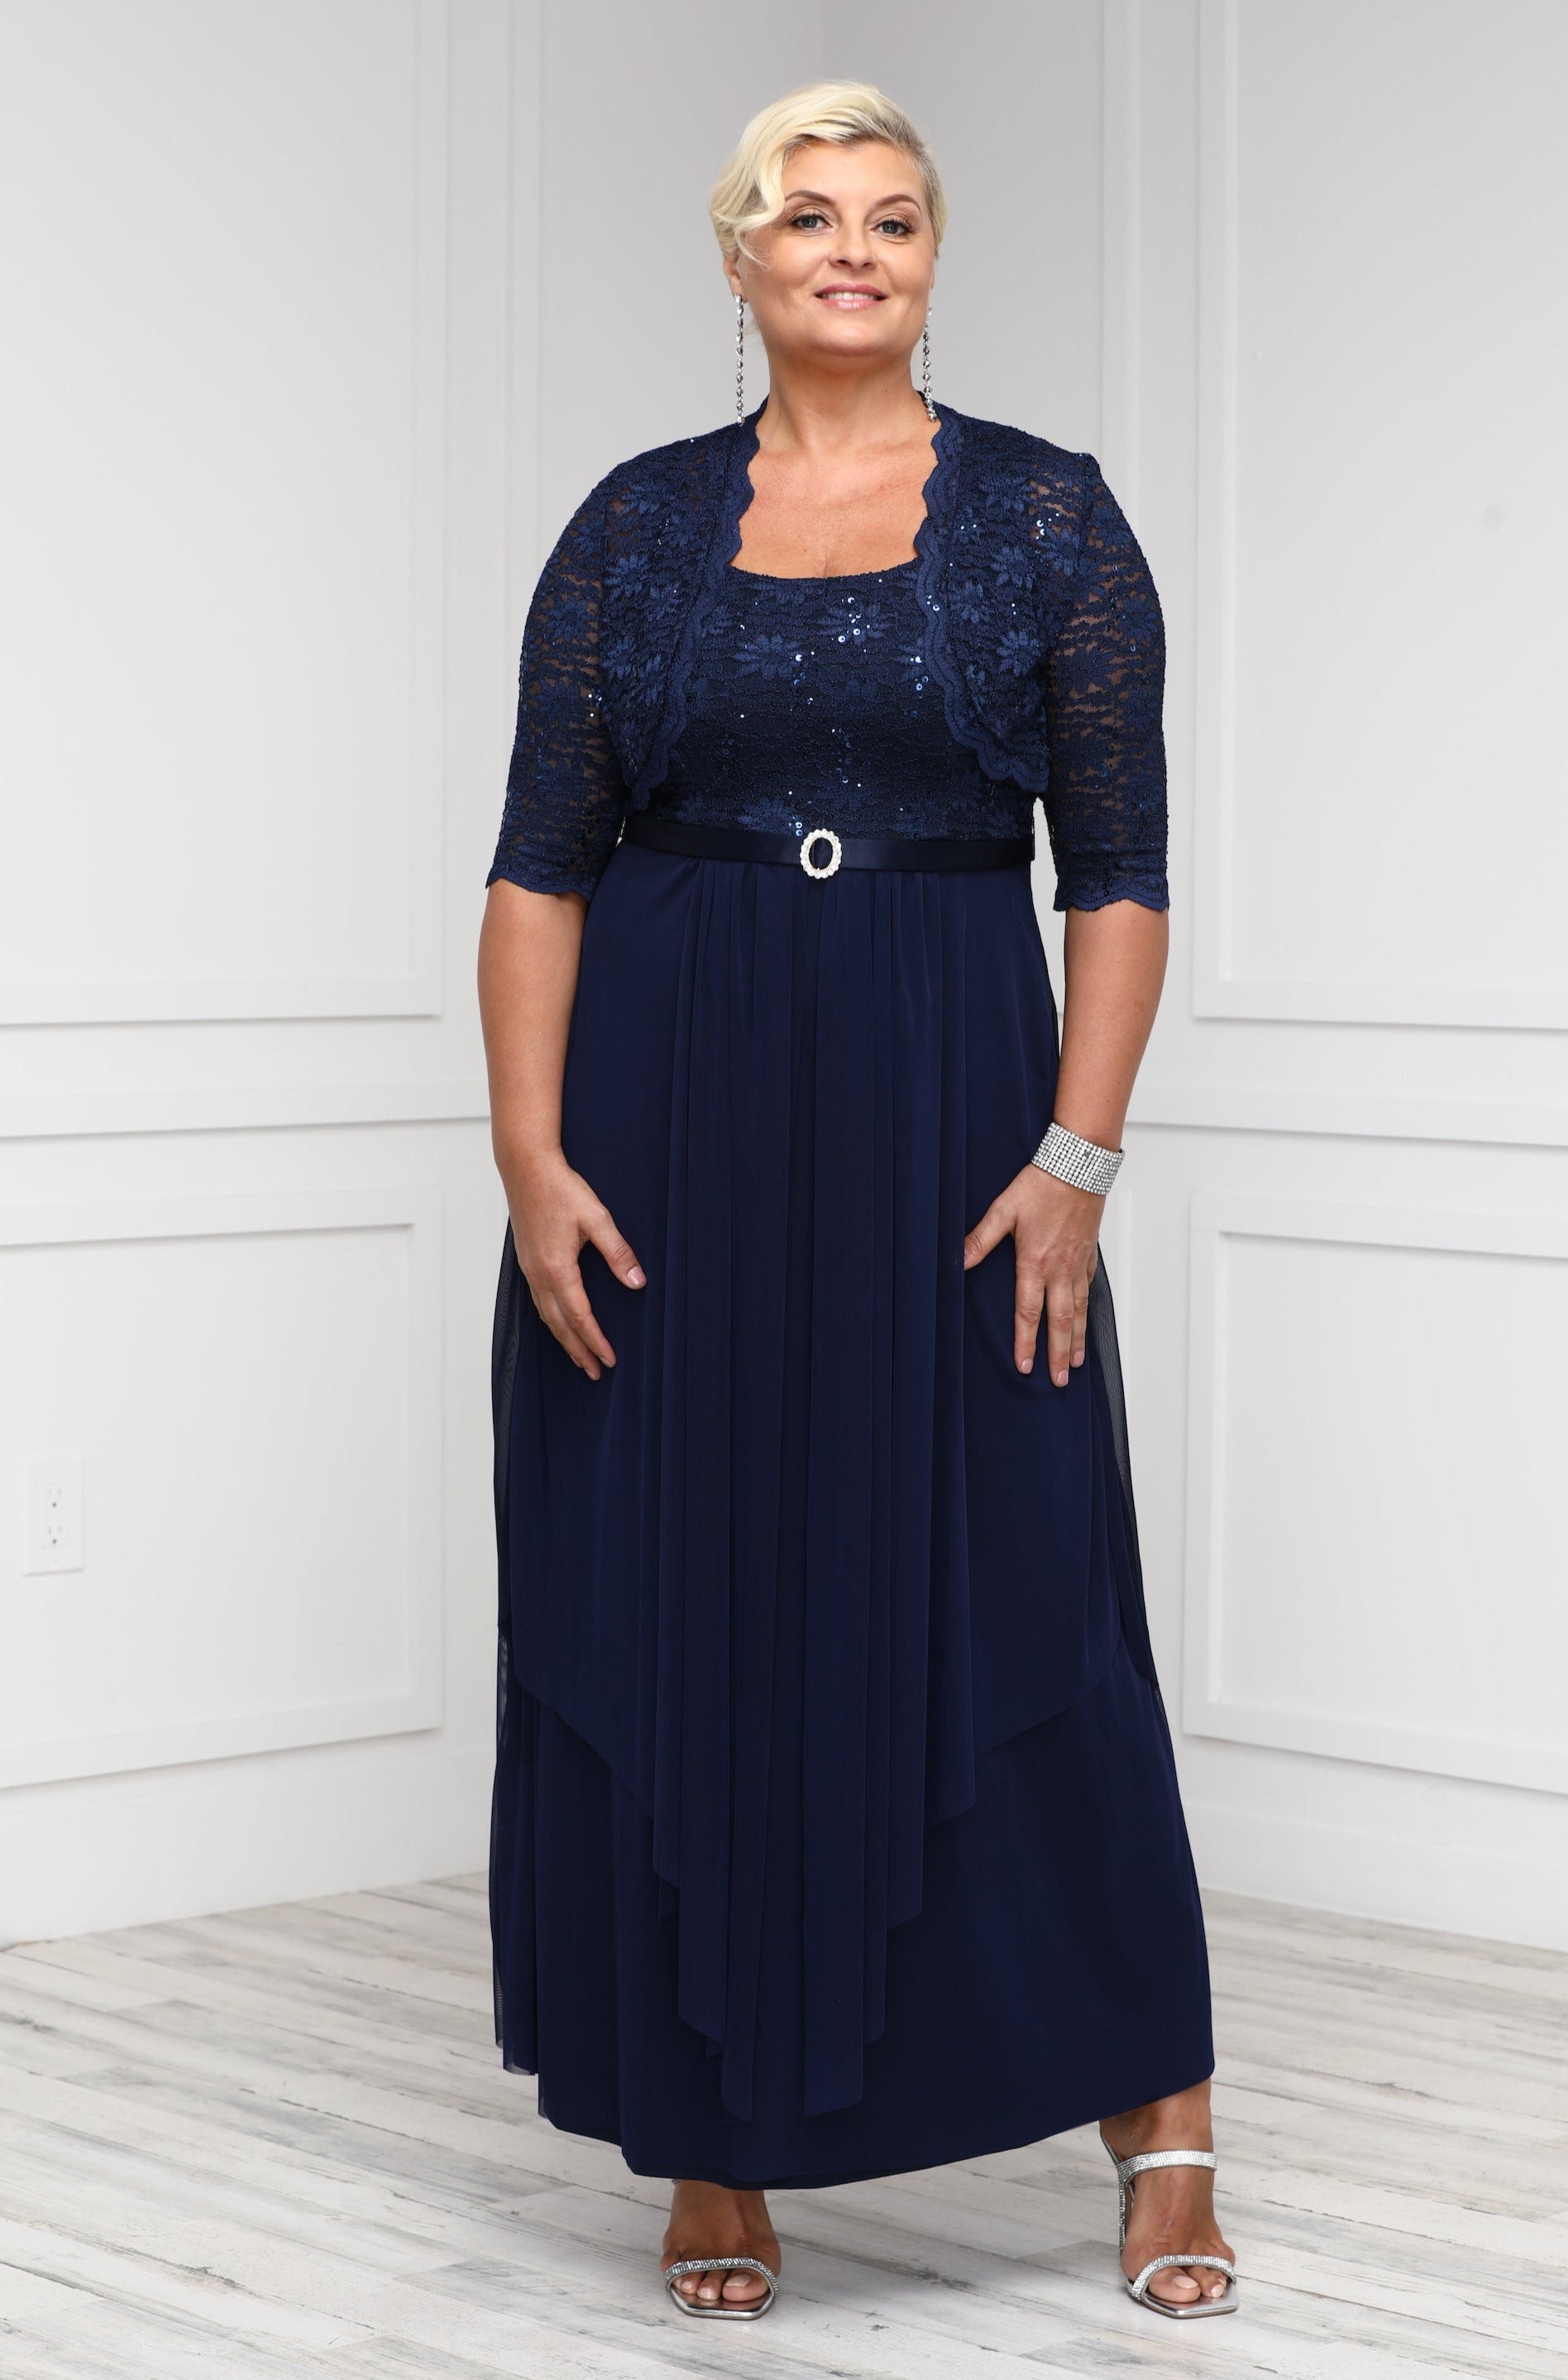 12 Mother Of The Bride Dresses With Jackets For Plus Size  Mother of bride  outfits, Mother of the bride suits, Mother of the bride plus size